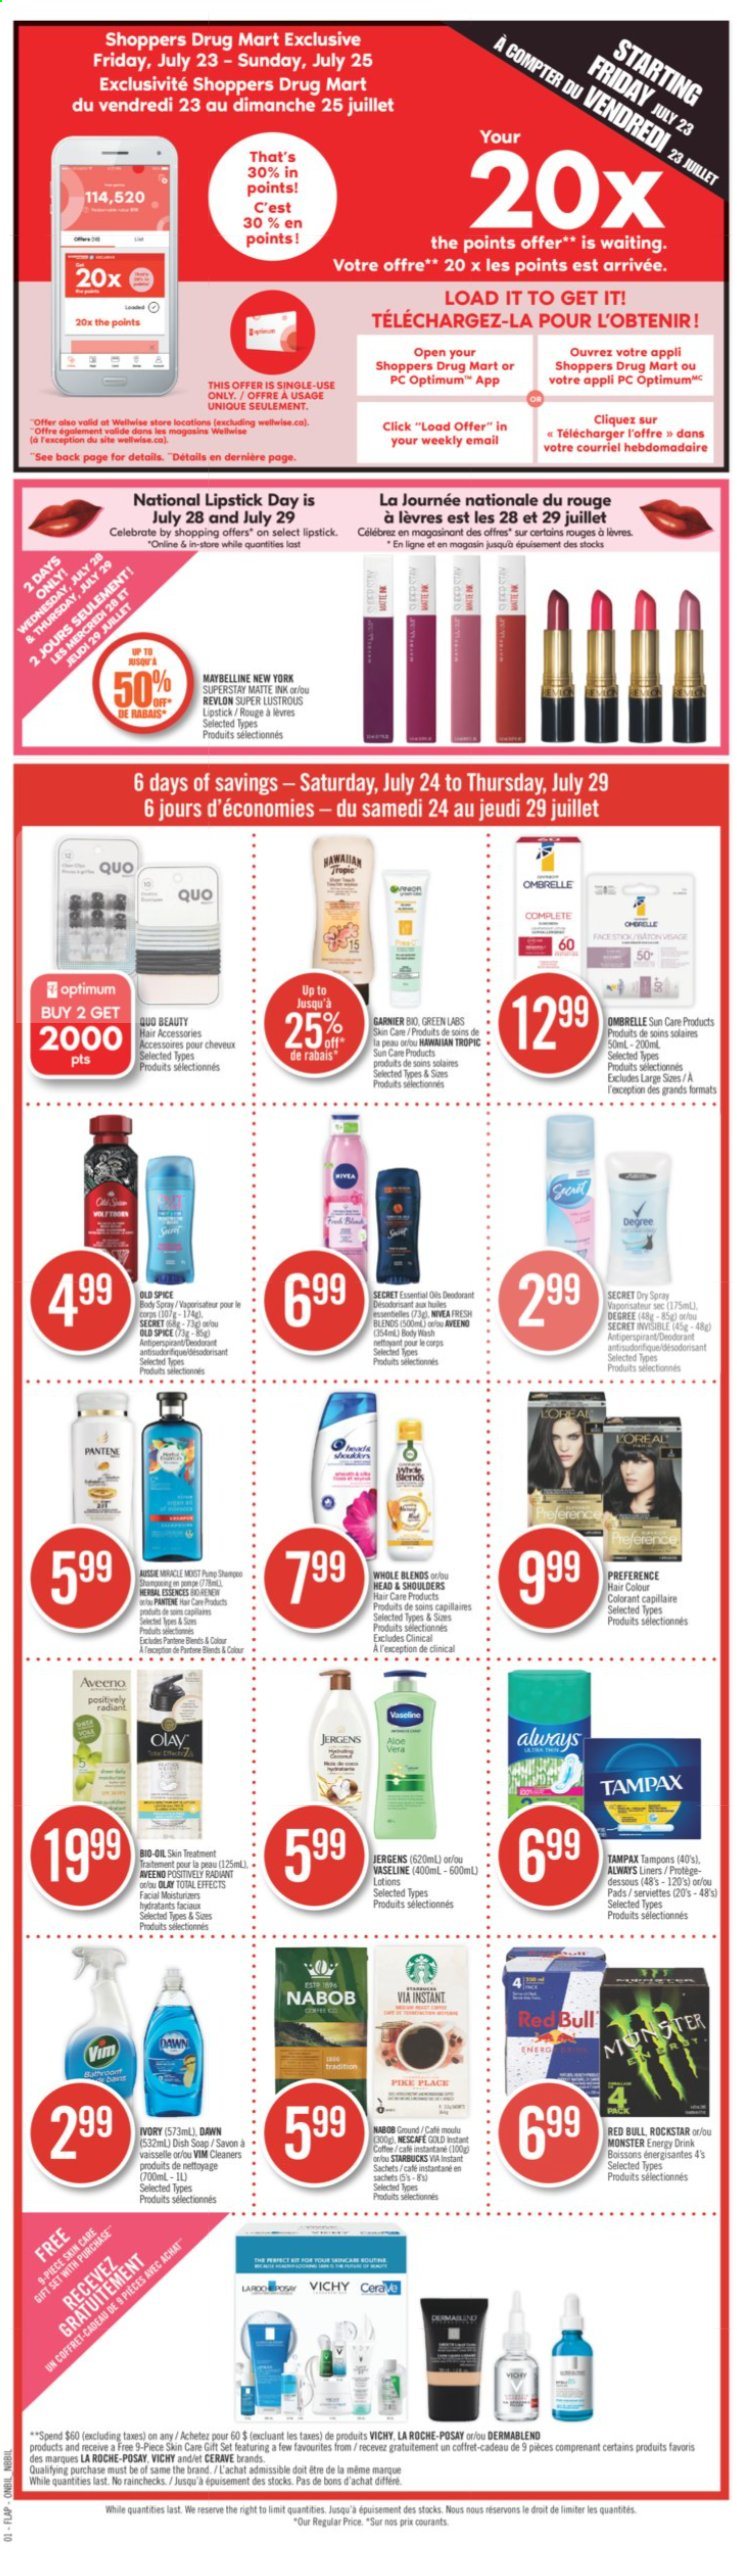 thumbnail - Shoppers Drug Mart Flyer - July 24, 2021 - July 29, 2021 - Sales products - spice, oil, energy drink, Monster, Red Bull, Monster Energy, Rockstar, coffee, Starbucks, Aveeno, Always liners, body wash, Vichy, Vaseline, soap, tampons, CeraVe, L’Oréal, La Roche-Posay, Olay, Revlon, hair color, Jergens, anti-perspirant, gift set, lipstick, Garnier, Maybelline, Tampax, Head & Shoulders, Pantene, Nivea, Old Spice, Nescafé, deodorant. Page 13.